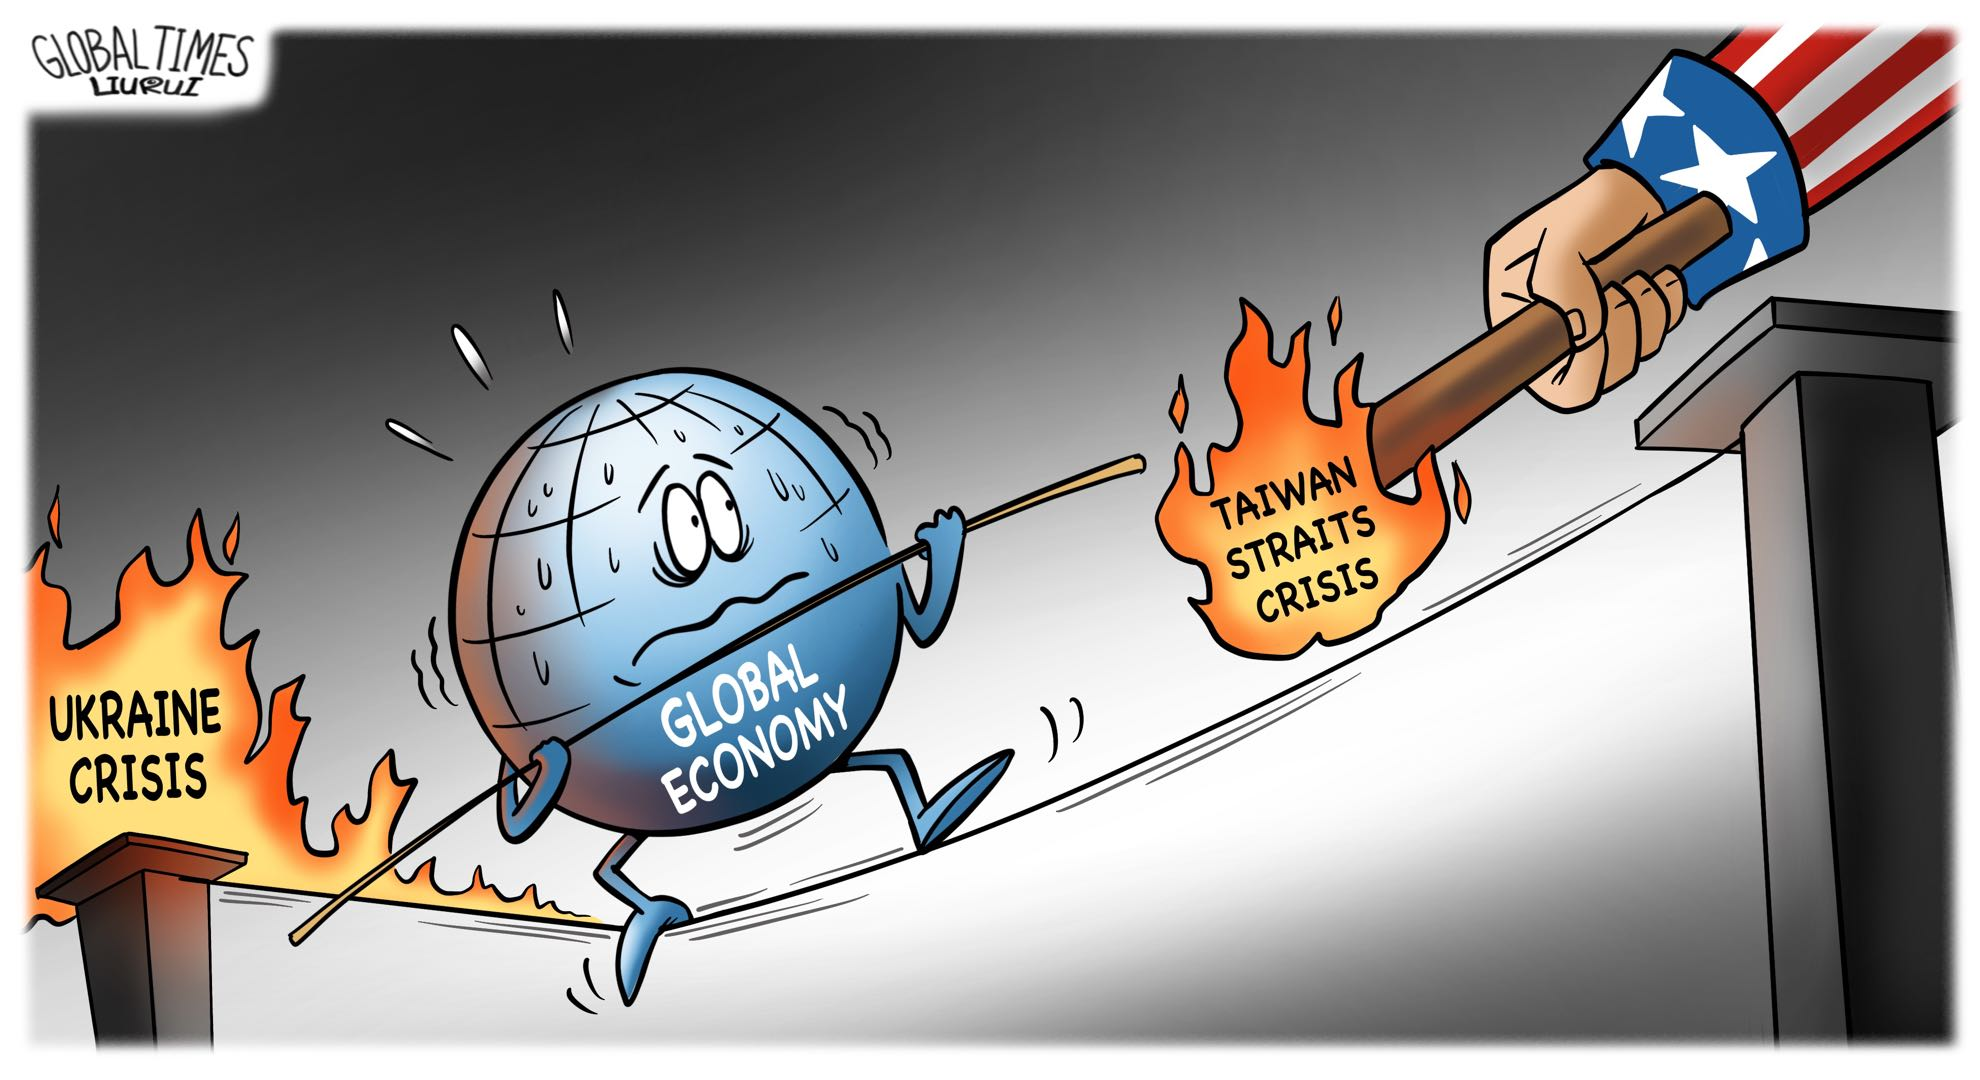 US fanning flames may collapse global economy already on "tightrope walk."